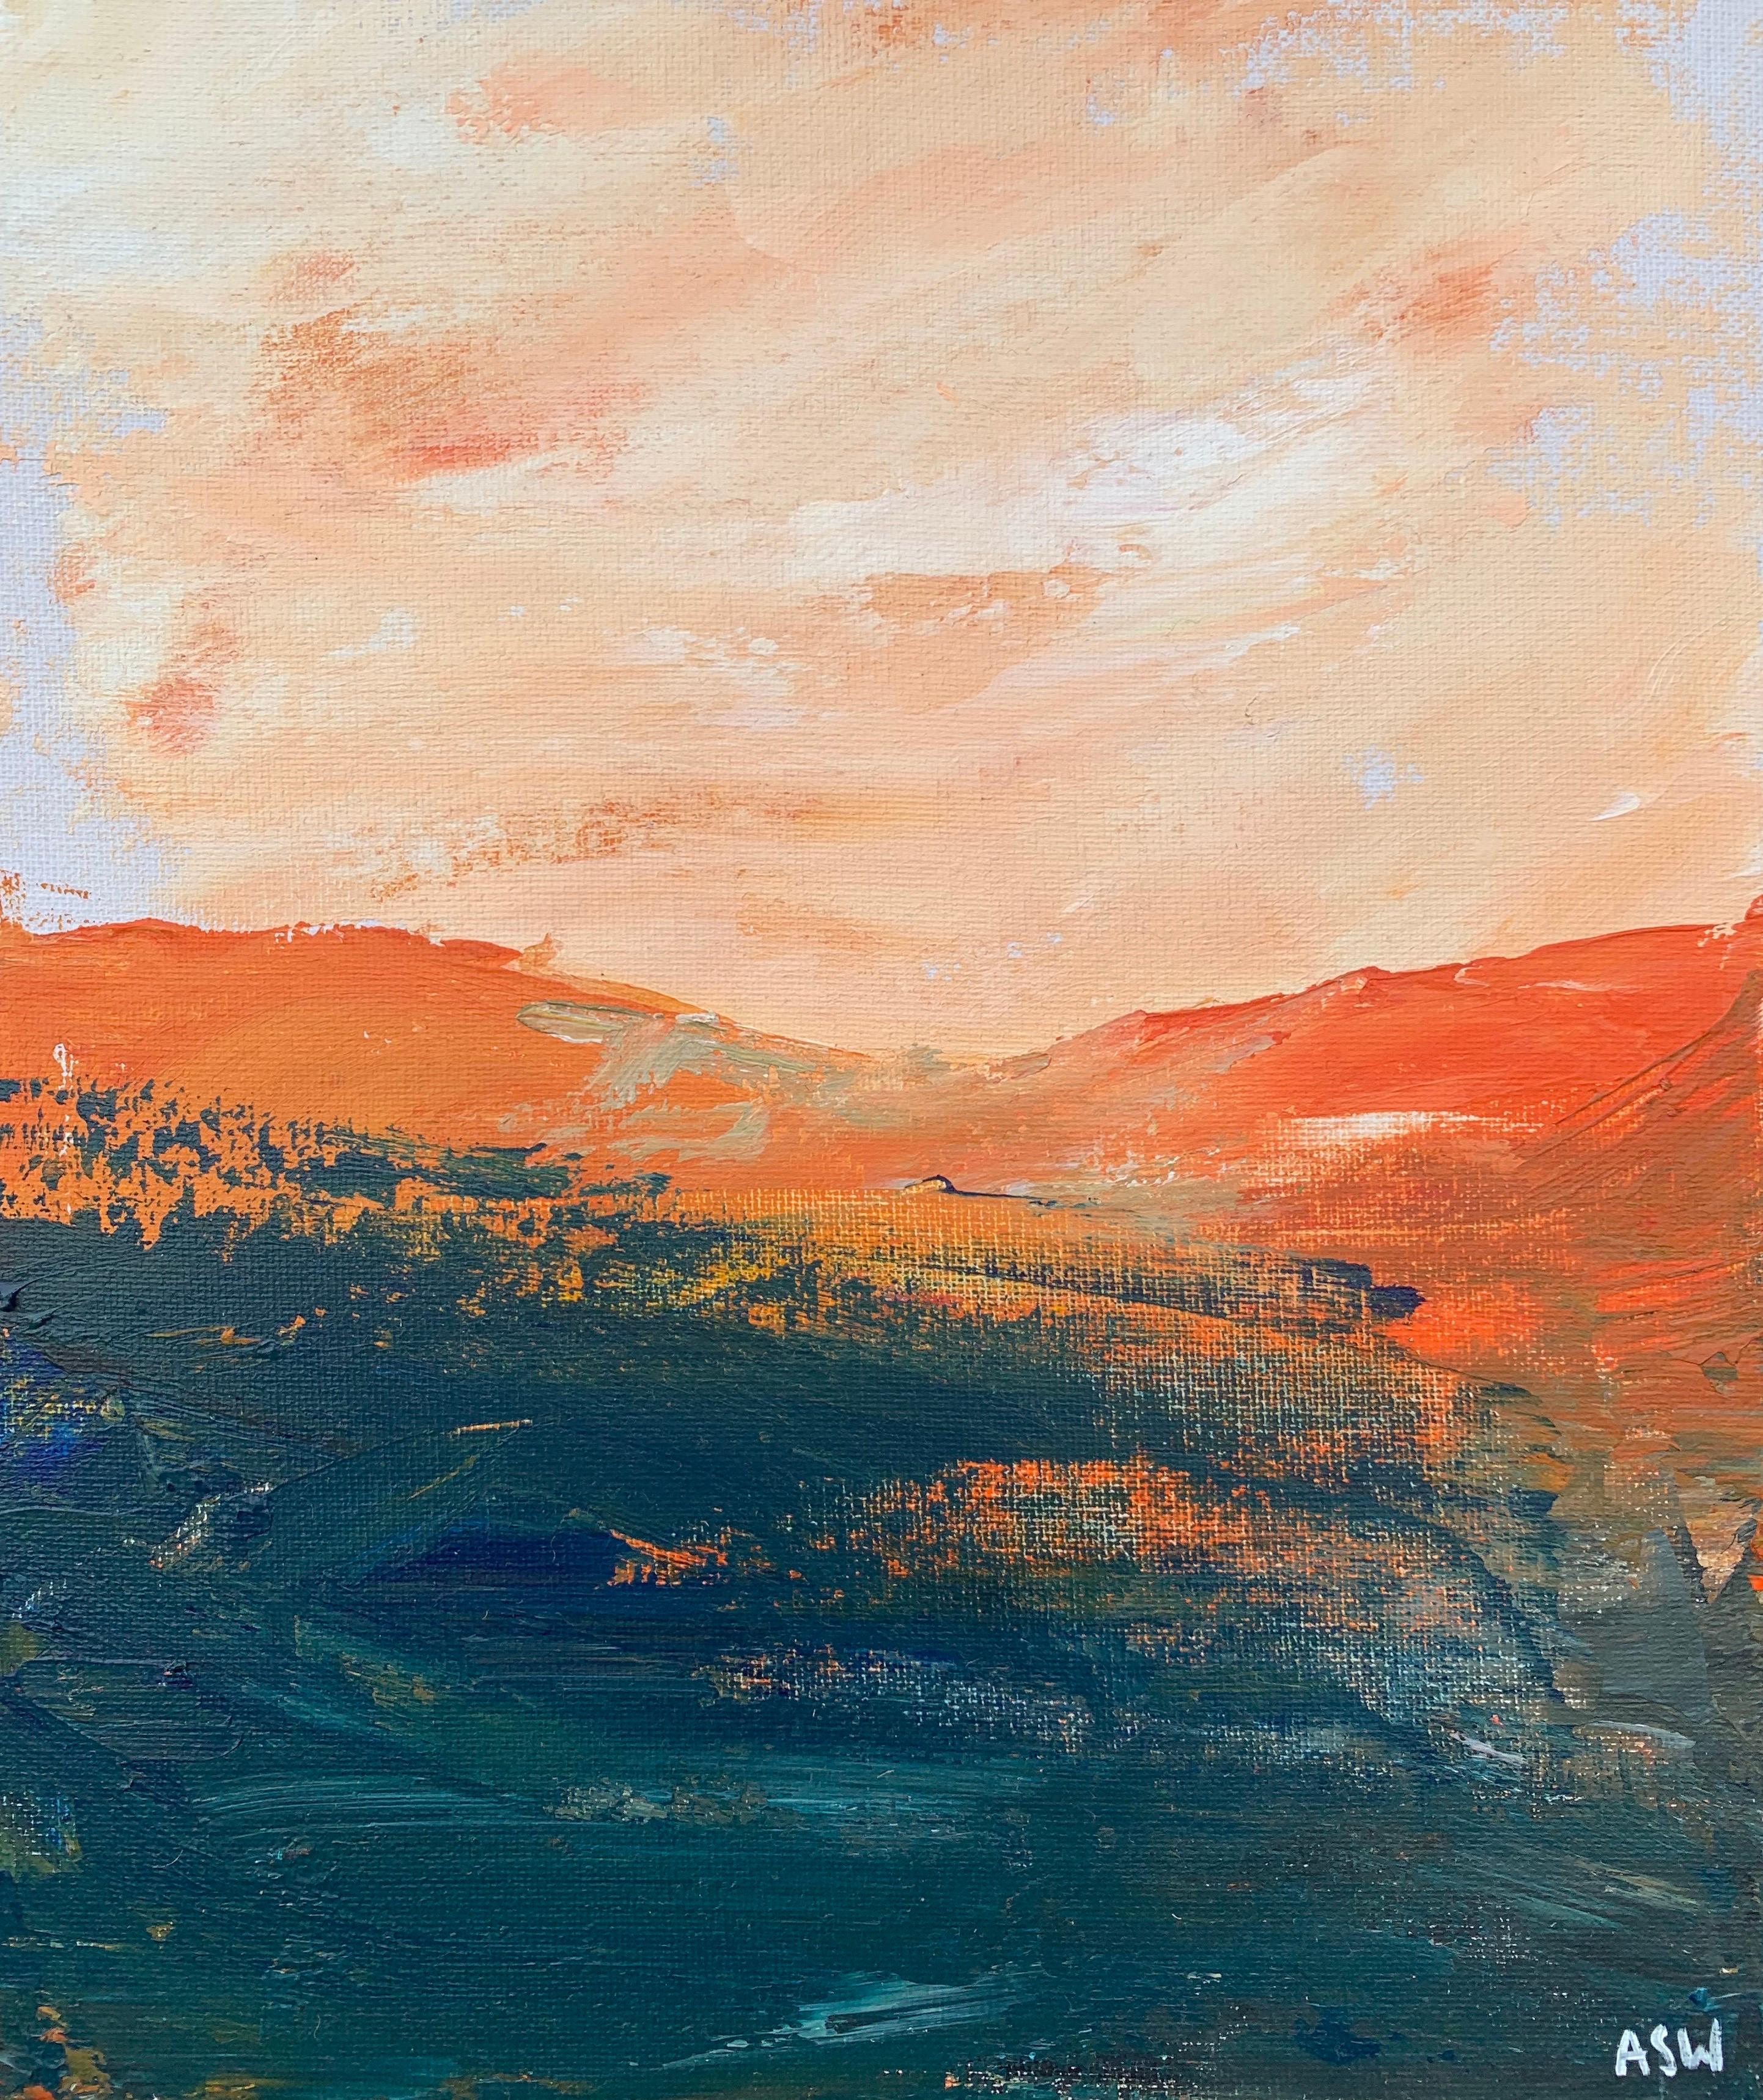 Abstract Orange & Black Mountain Landscape Study by Contemporary British Artist For Sale 2